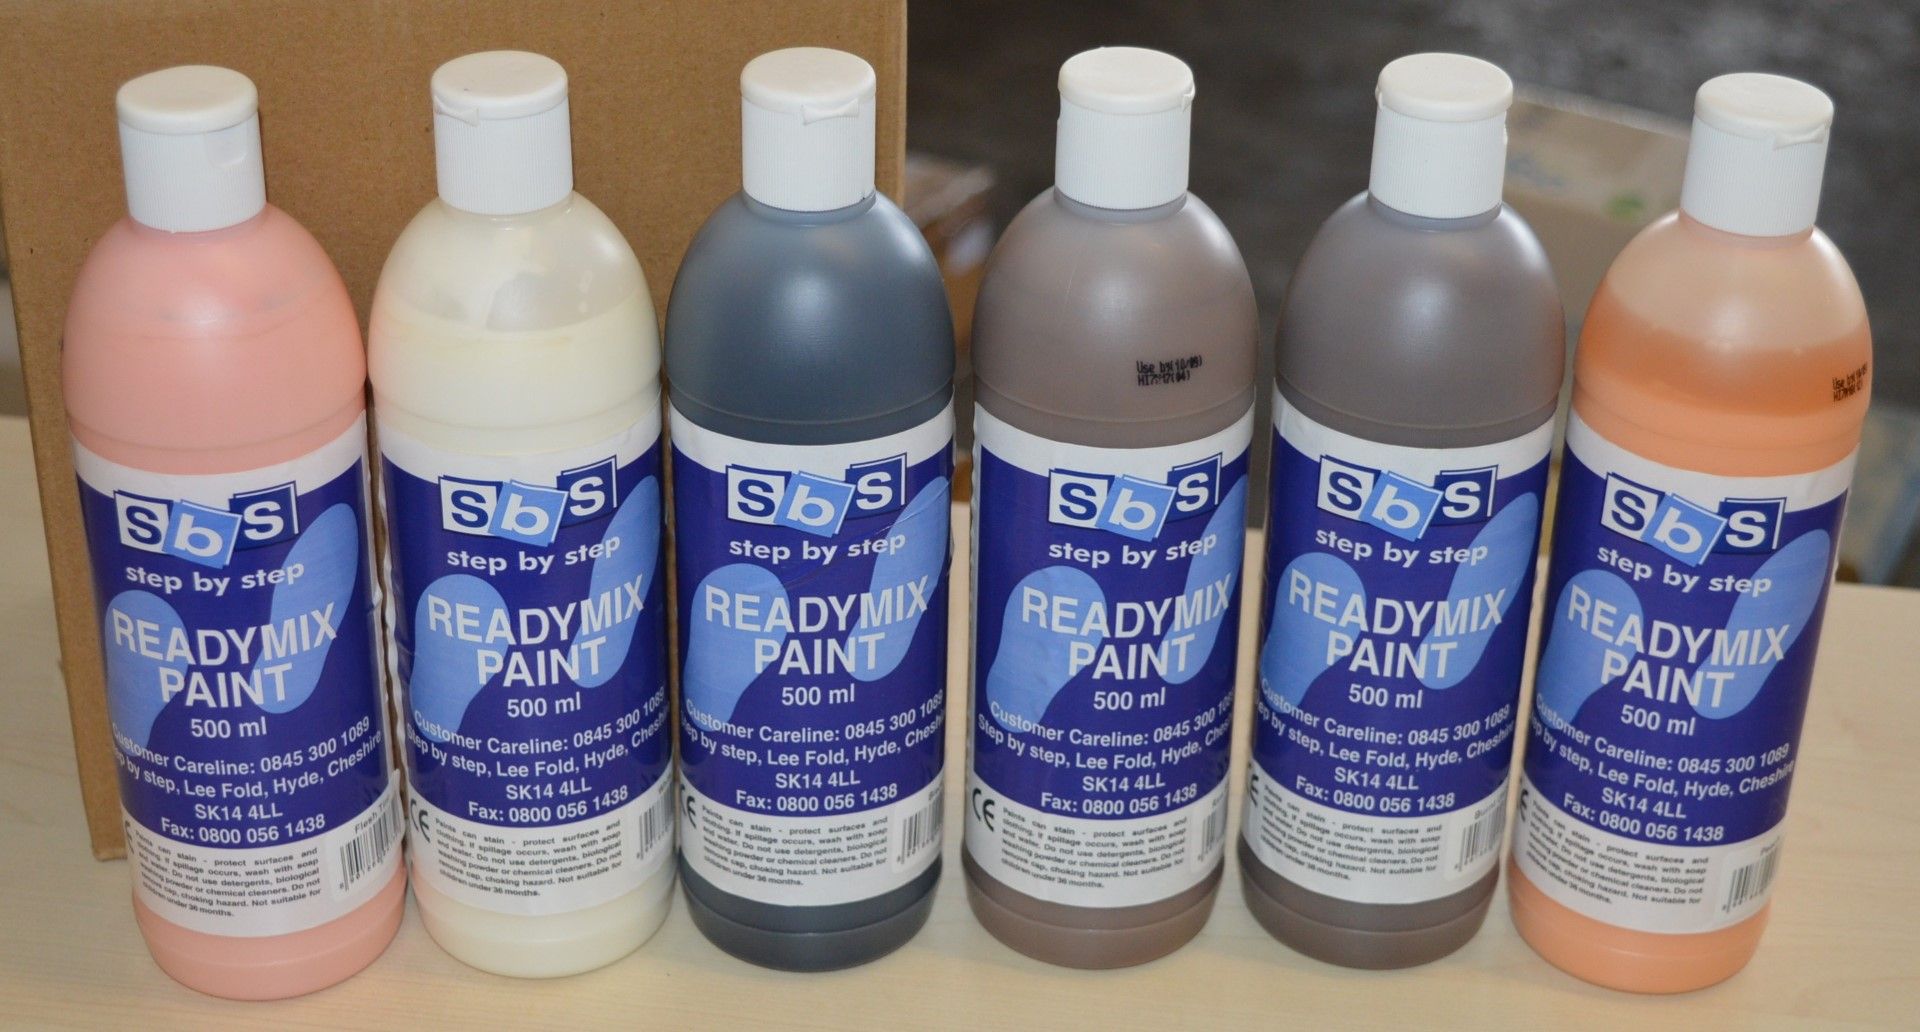 6 x Sets of SBS Step by Step Readymix Paint - 36 x 500ml Bottles - 6 x Sets of 6 Bottles - Unused